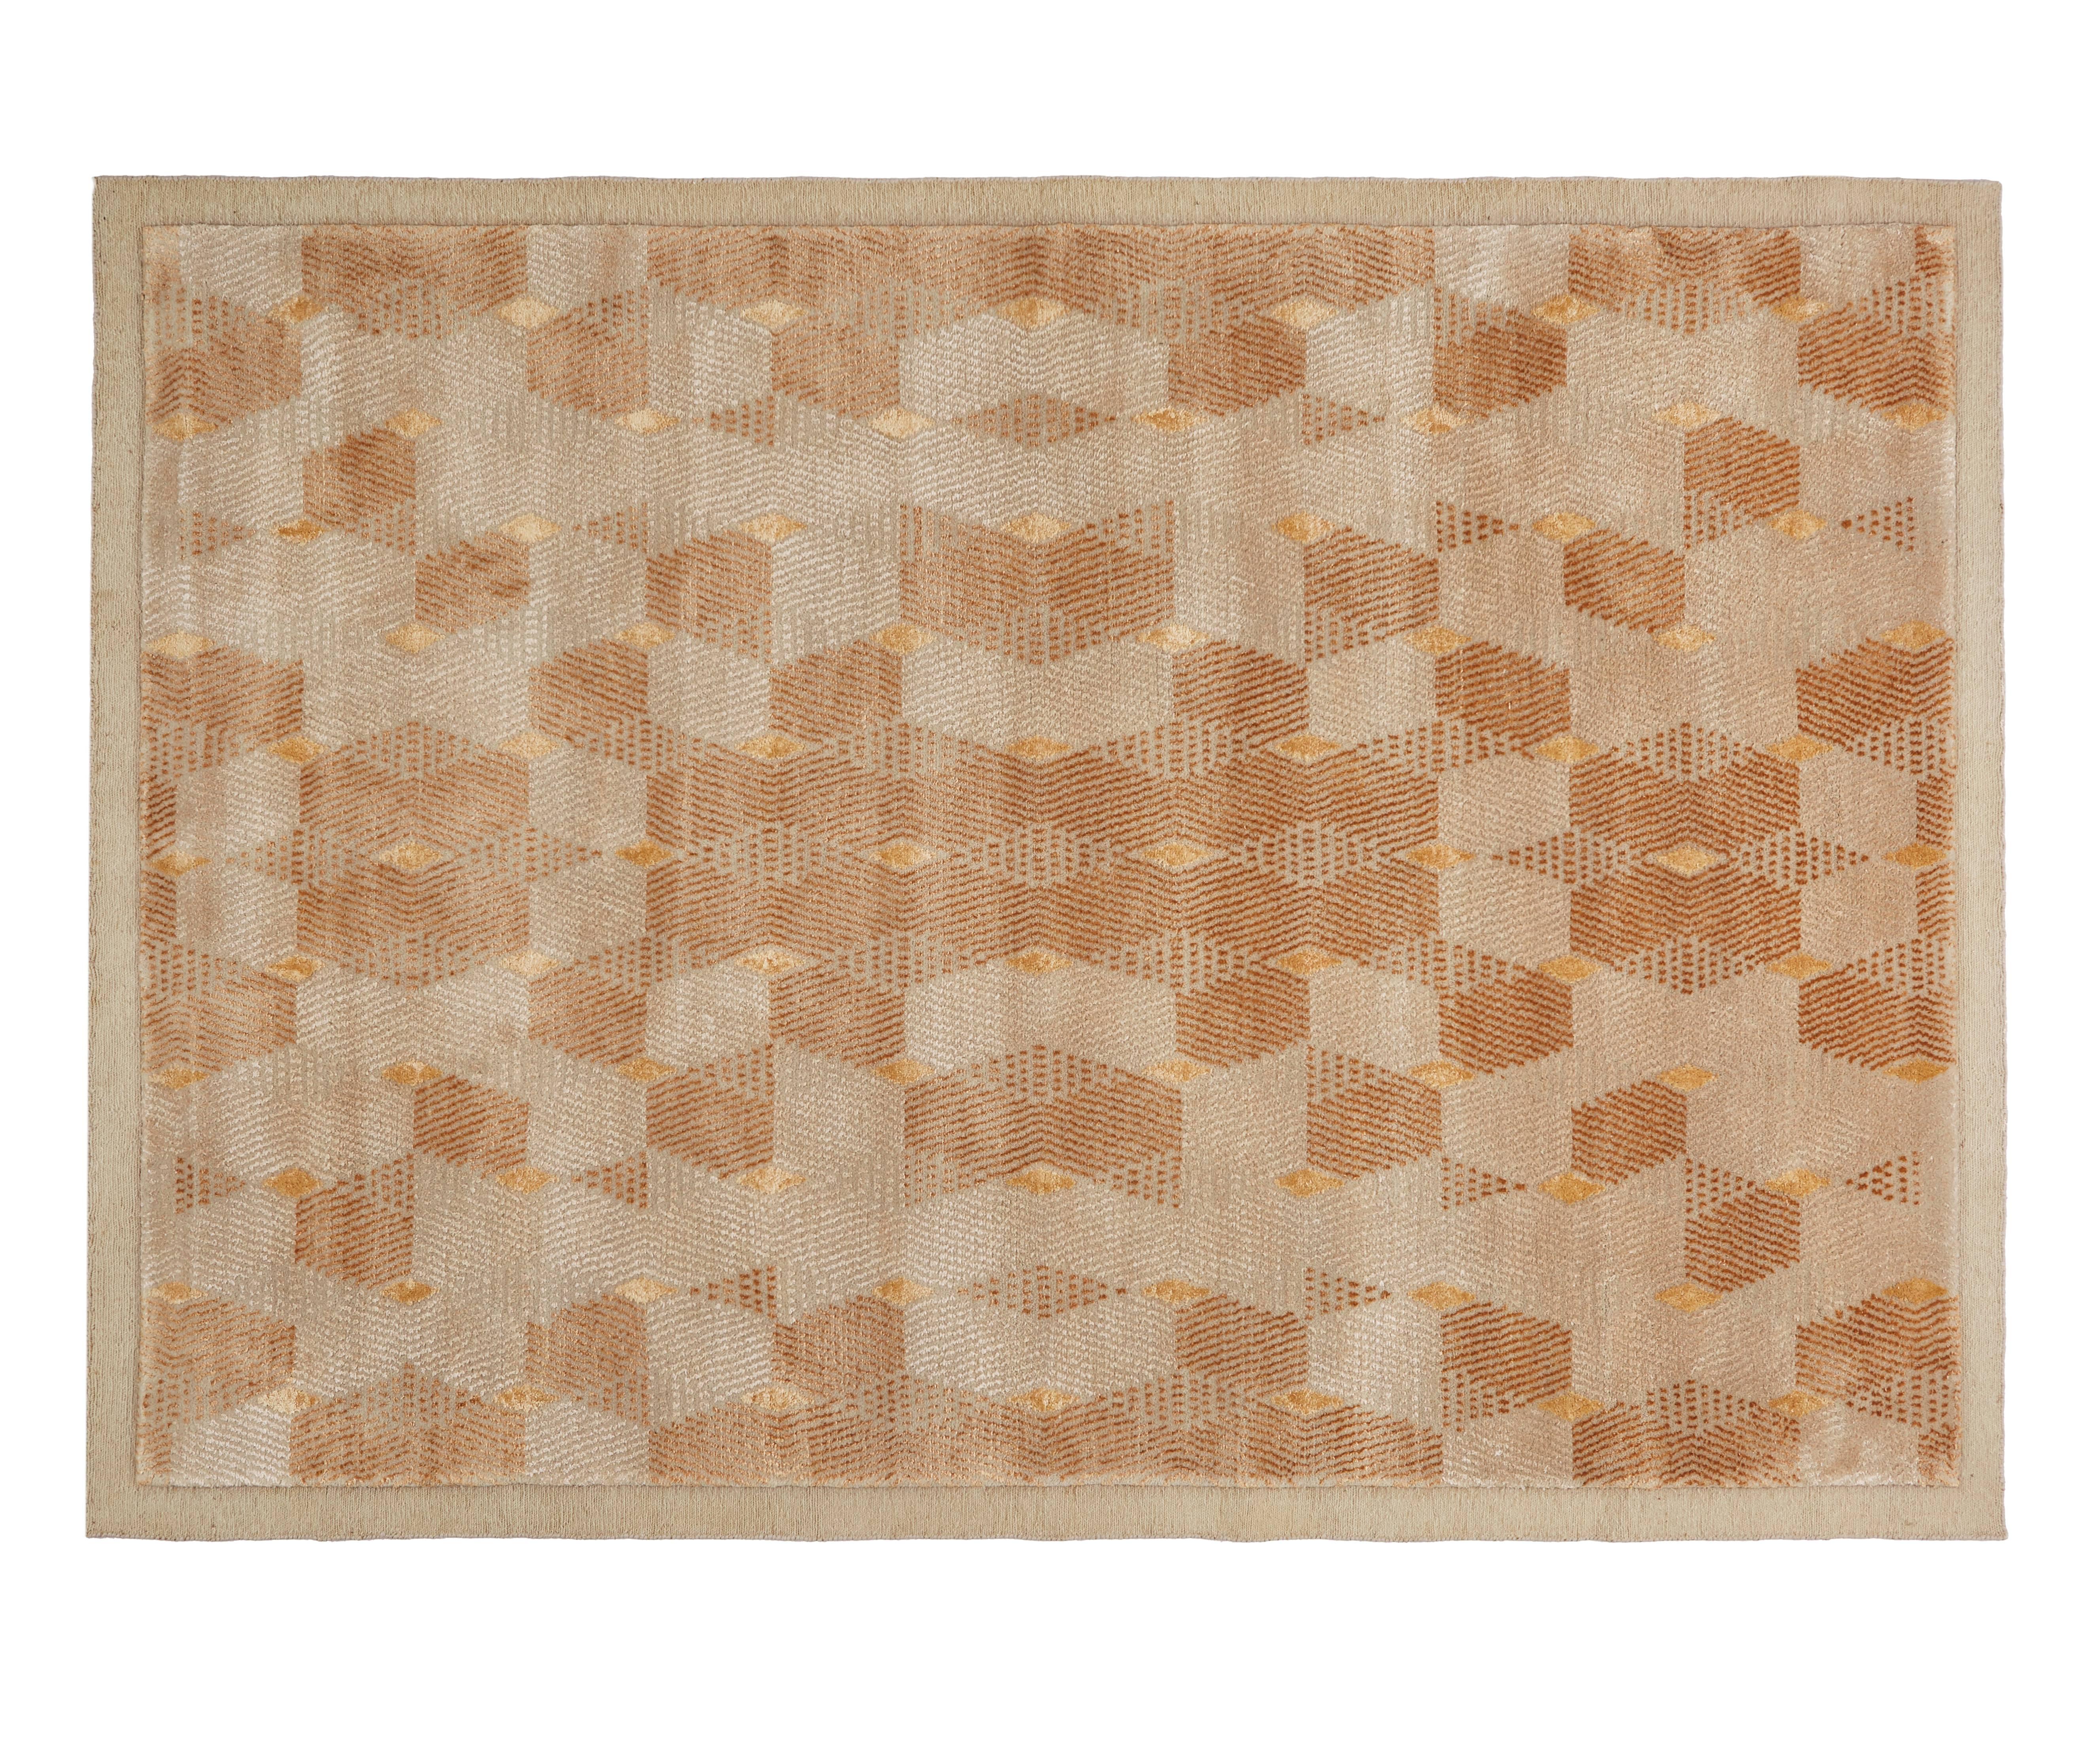 Hand-knotted (80 knots/inch2) pure New Zealand wool and viscose Soumak rug. Bespoke contemporary design featuring Birgit Israel signature honeycomb pattern. 

Made specifically to required dimensions with alternative colour variations, density and